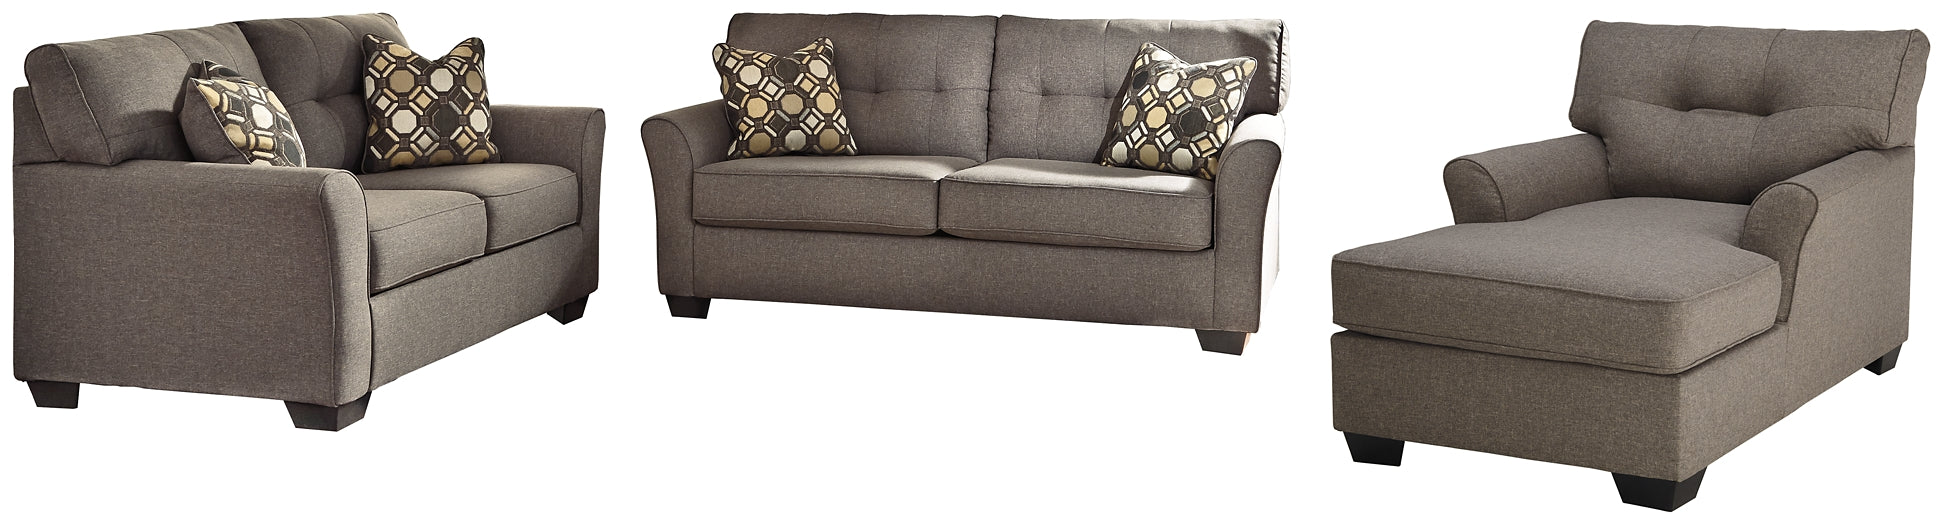 Tibbee Sofa, Loveseat and Chaise JB's Furniture  Home Furniture, Home Decor, Furniture Store